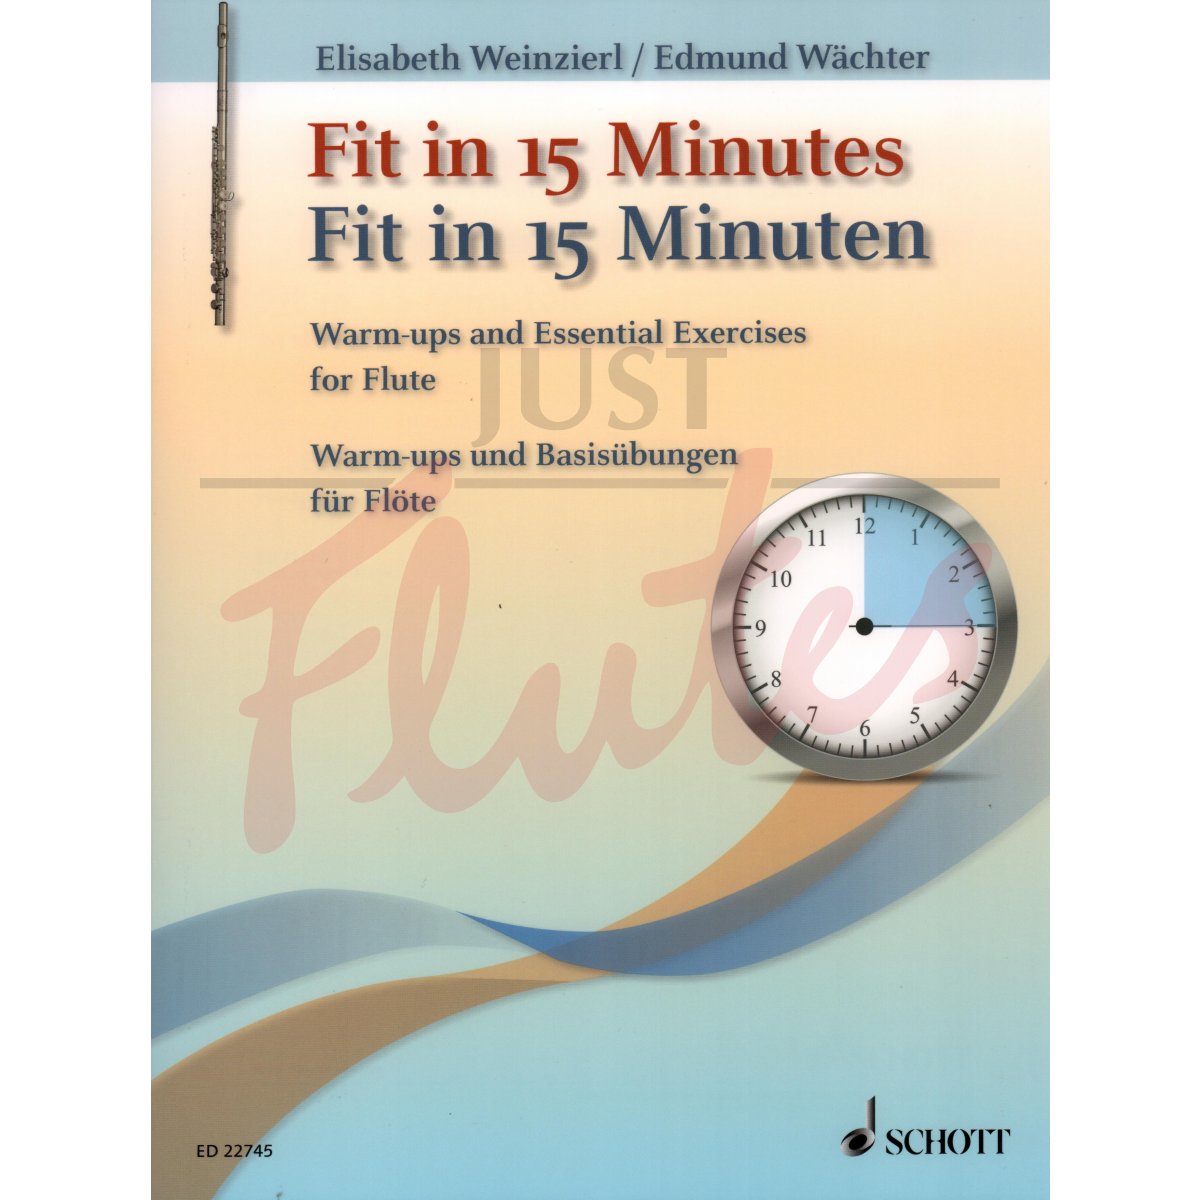 Fit in 15 Minutes: Warm-ups and Essential Exercises for Flute